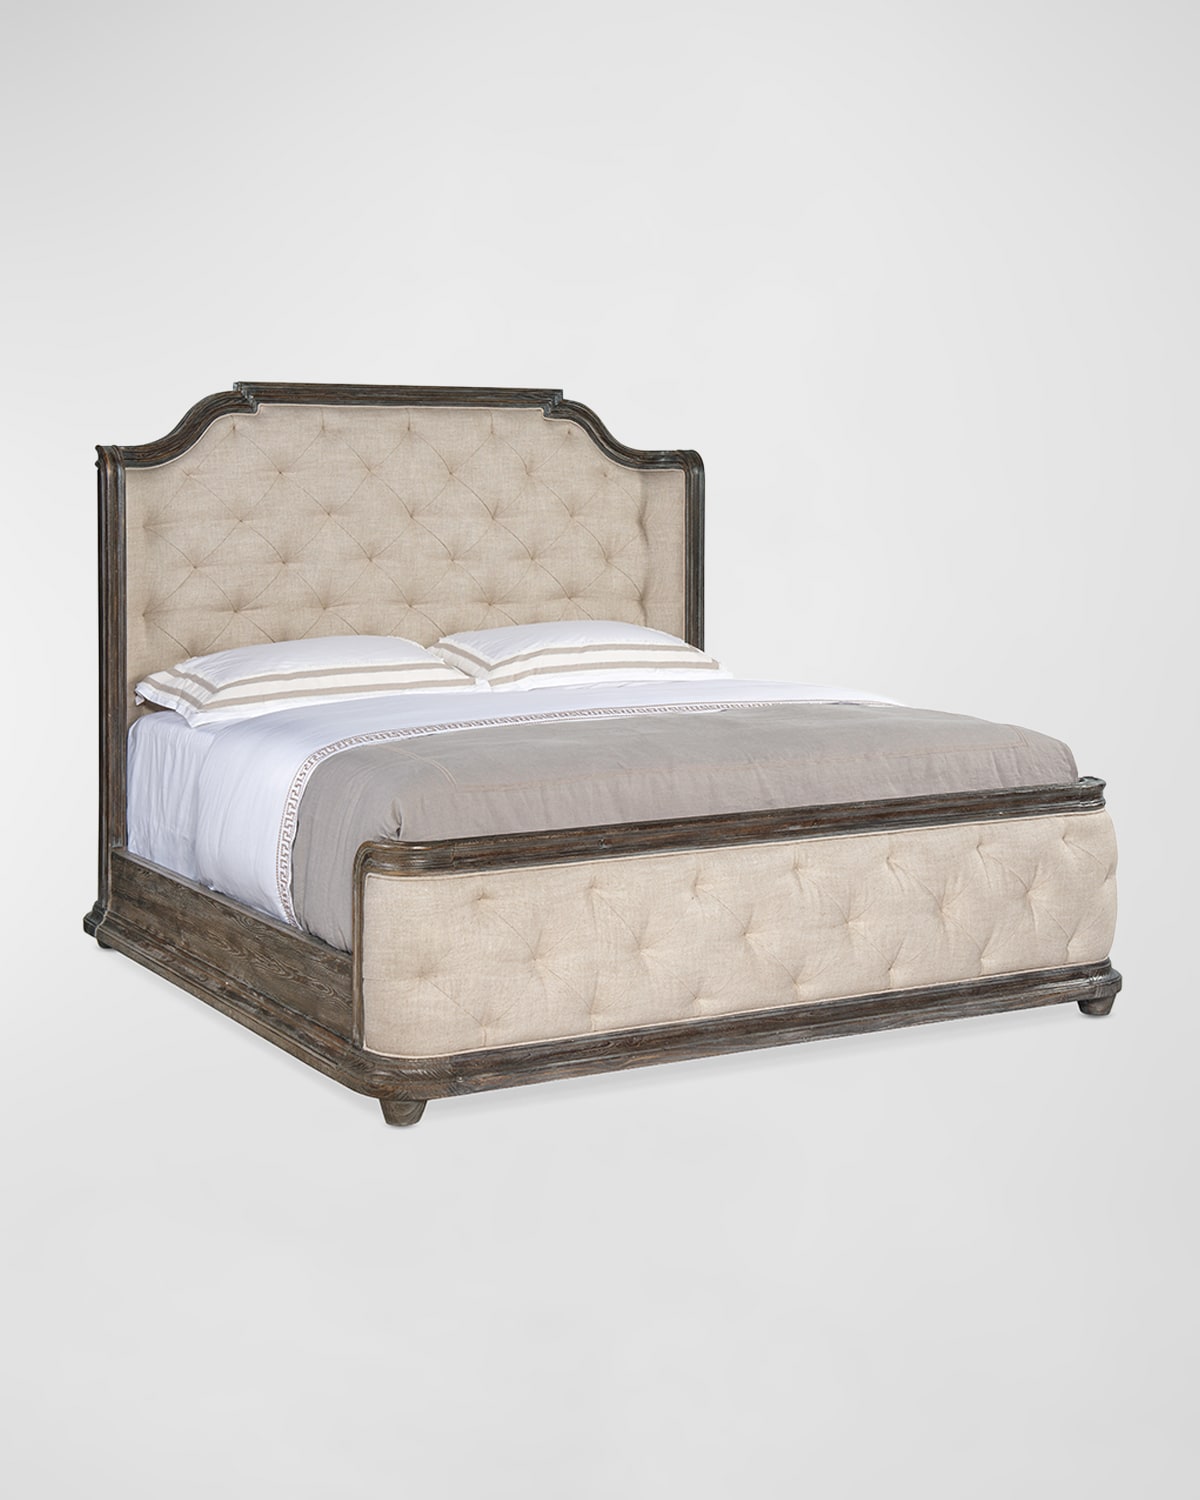 Hooker Furniture Traditions King Tufted Bed In Maduro, Biscuit